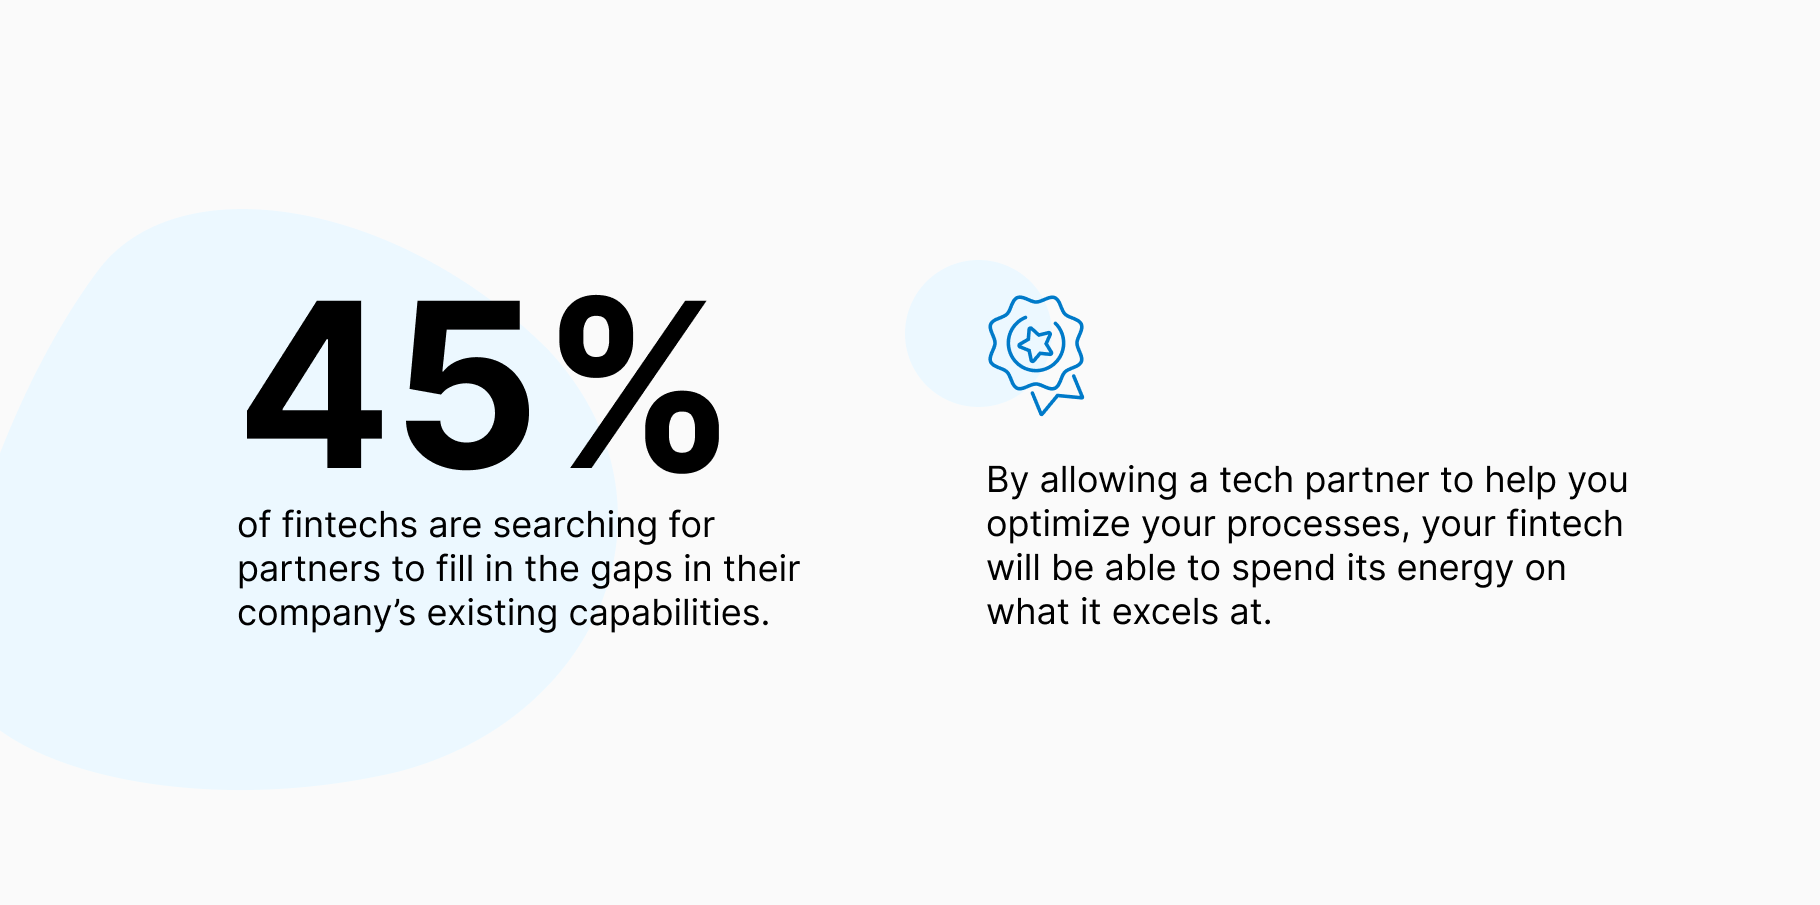 45% of fintechs are searching for partners to fill in the gaps in their company;s exsisting capabilities 